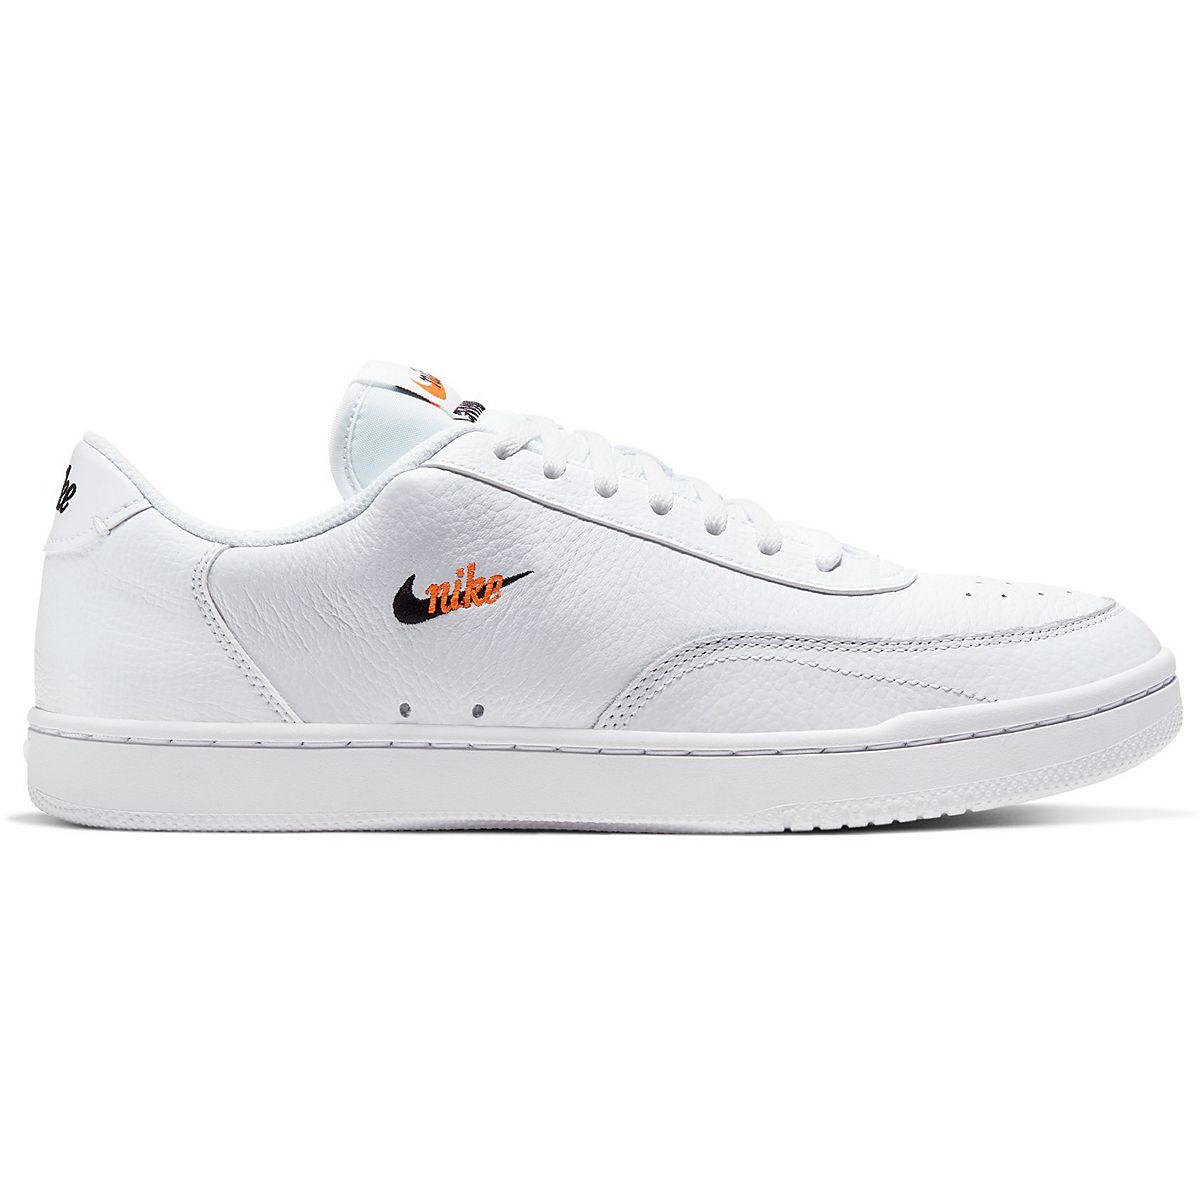 Nike Men's Court Vintage Premium Shoes | Free Shipping at Academy